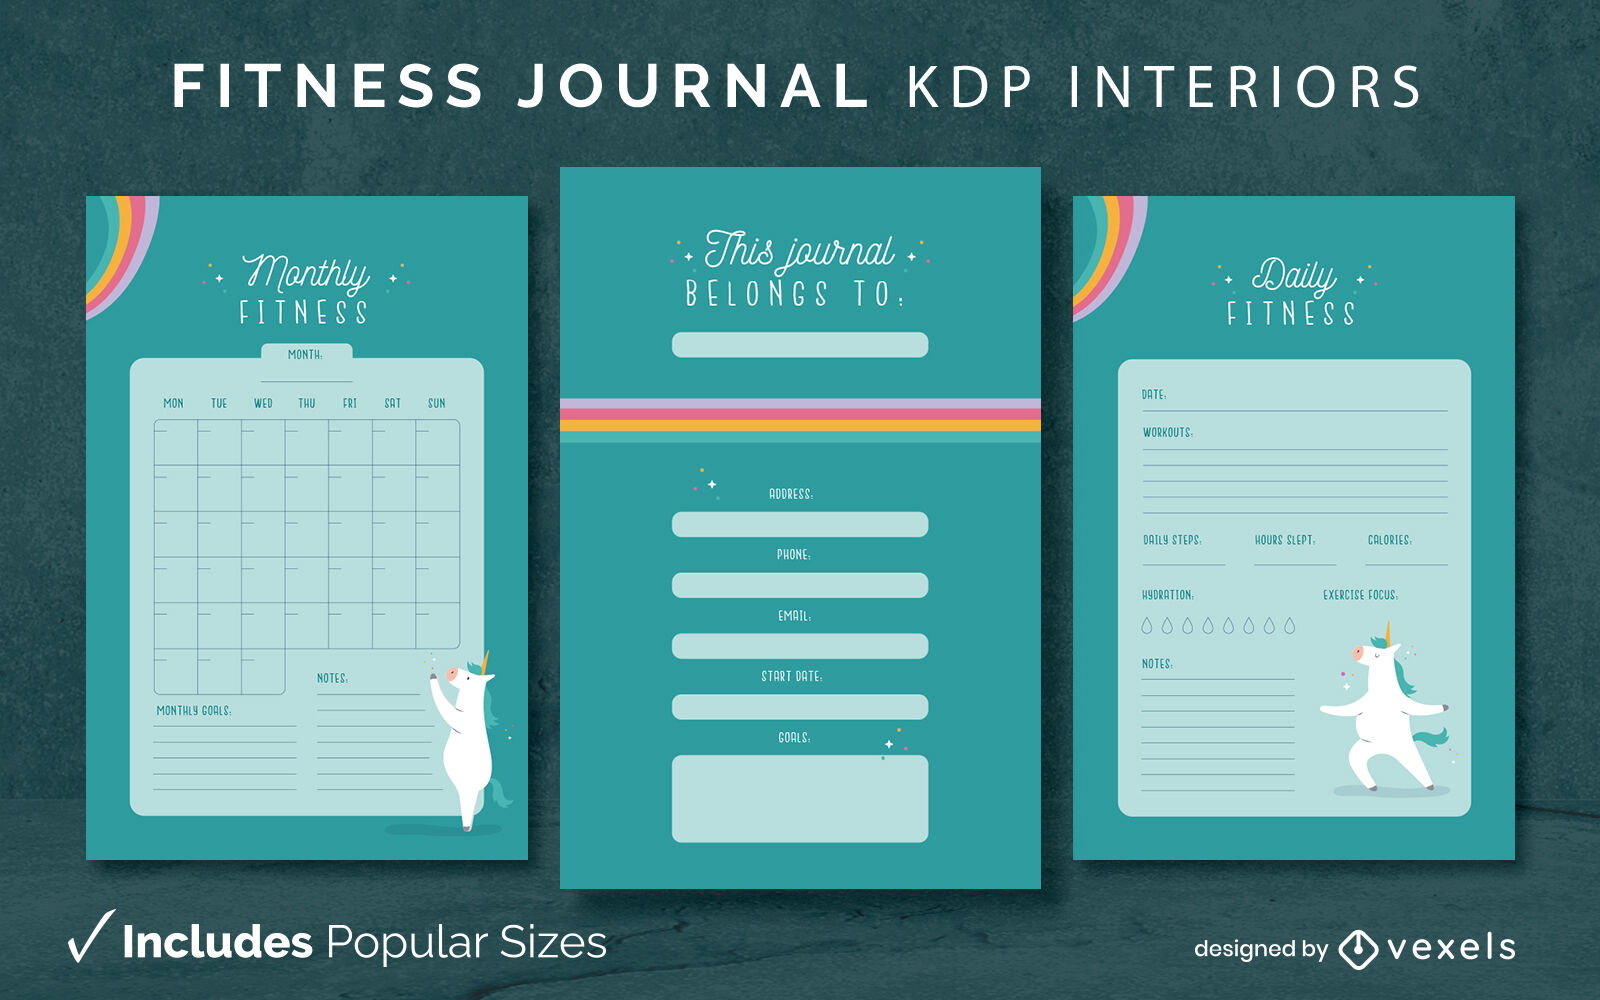 Fitness diary design template KDP